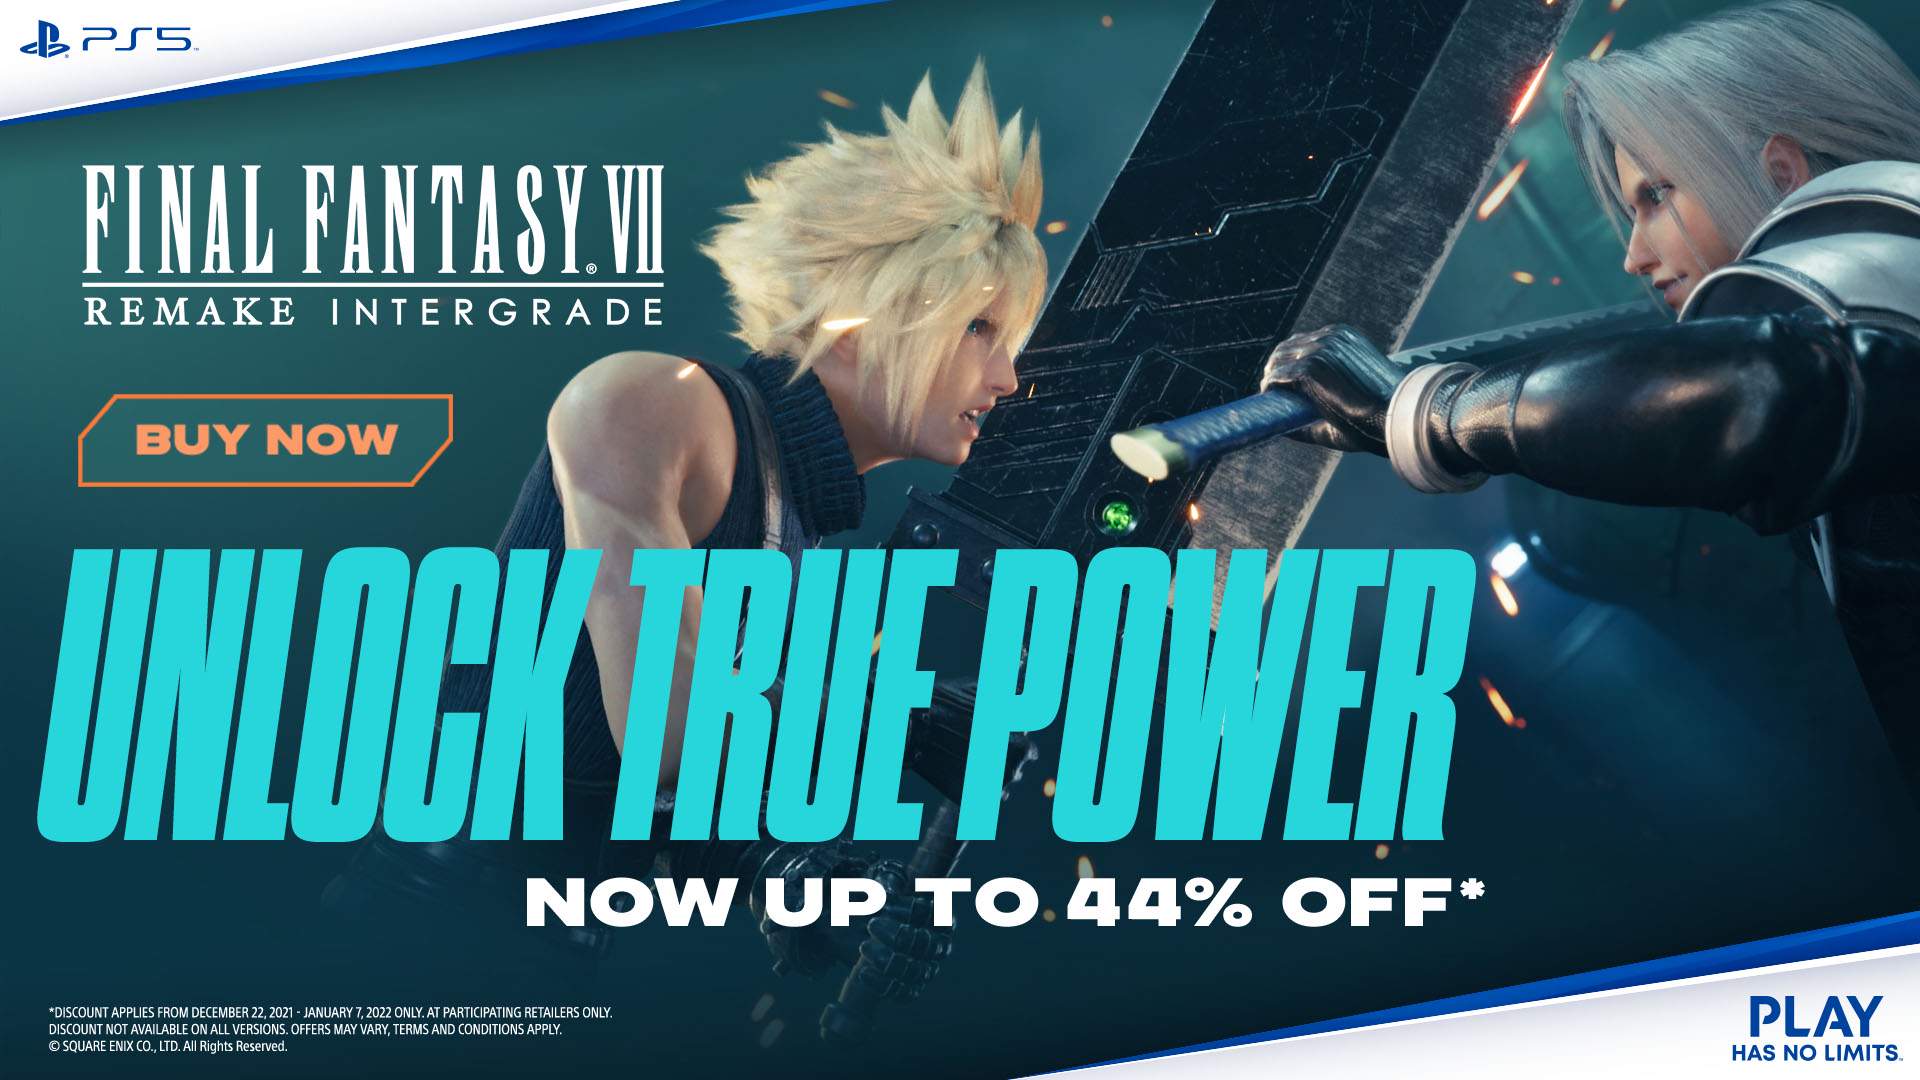 Cloud and Sephiroth clash swords. UP TO 44% OFF* FINAL FANTASY VII REMAKE INTERGRADE.